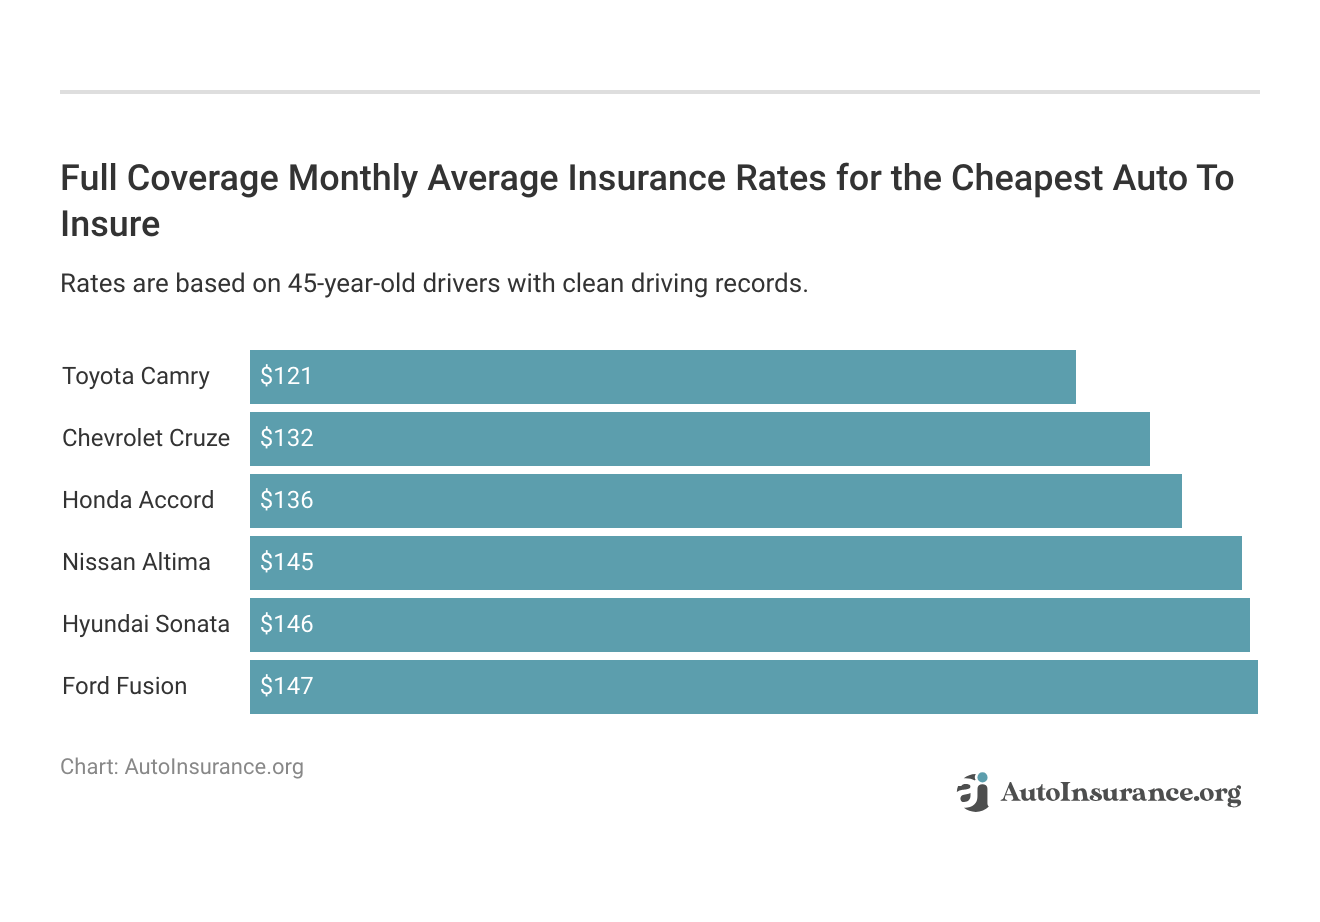 <h3>Full Coverage Monthly Average Insurance Rates for the Cheapest Auto To Insure</h3>